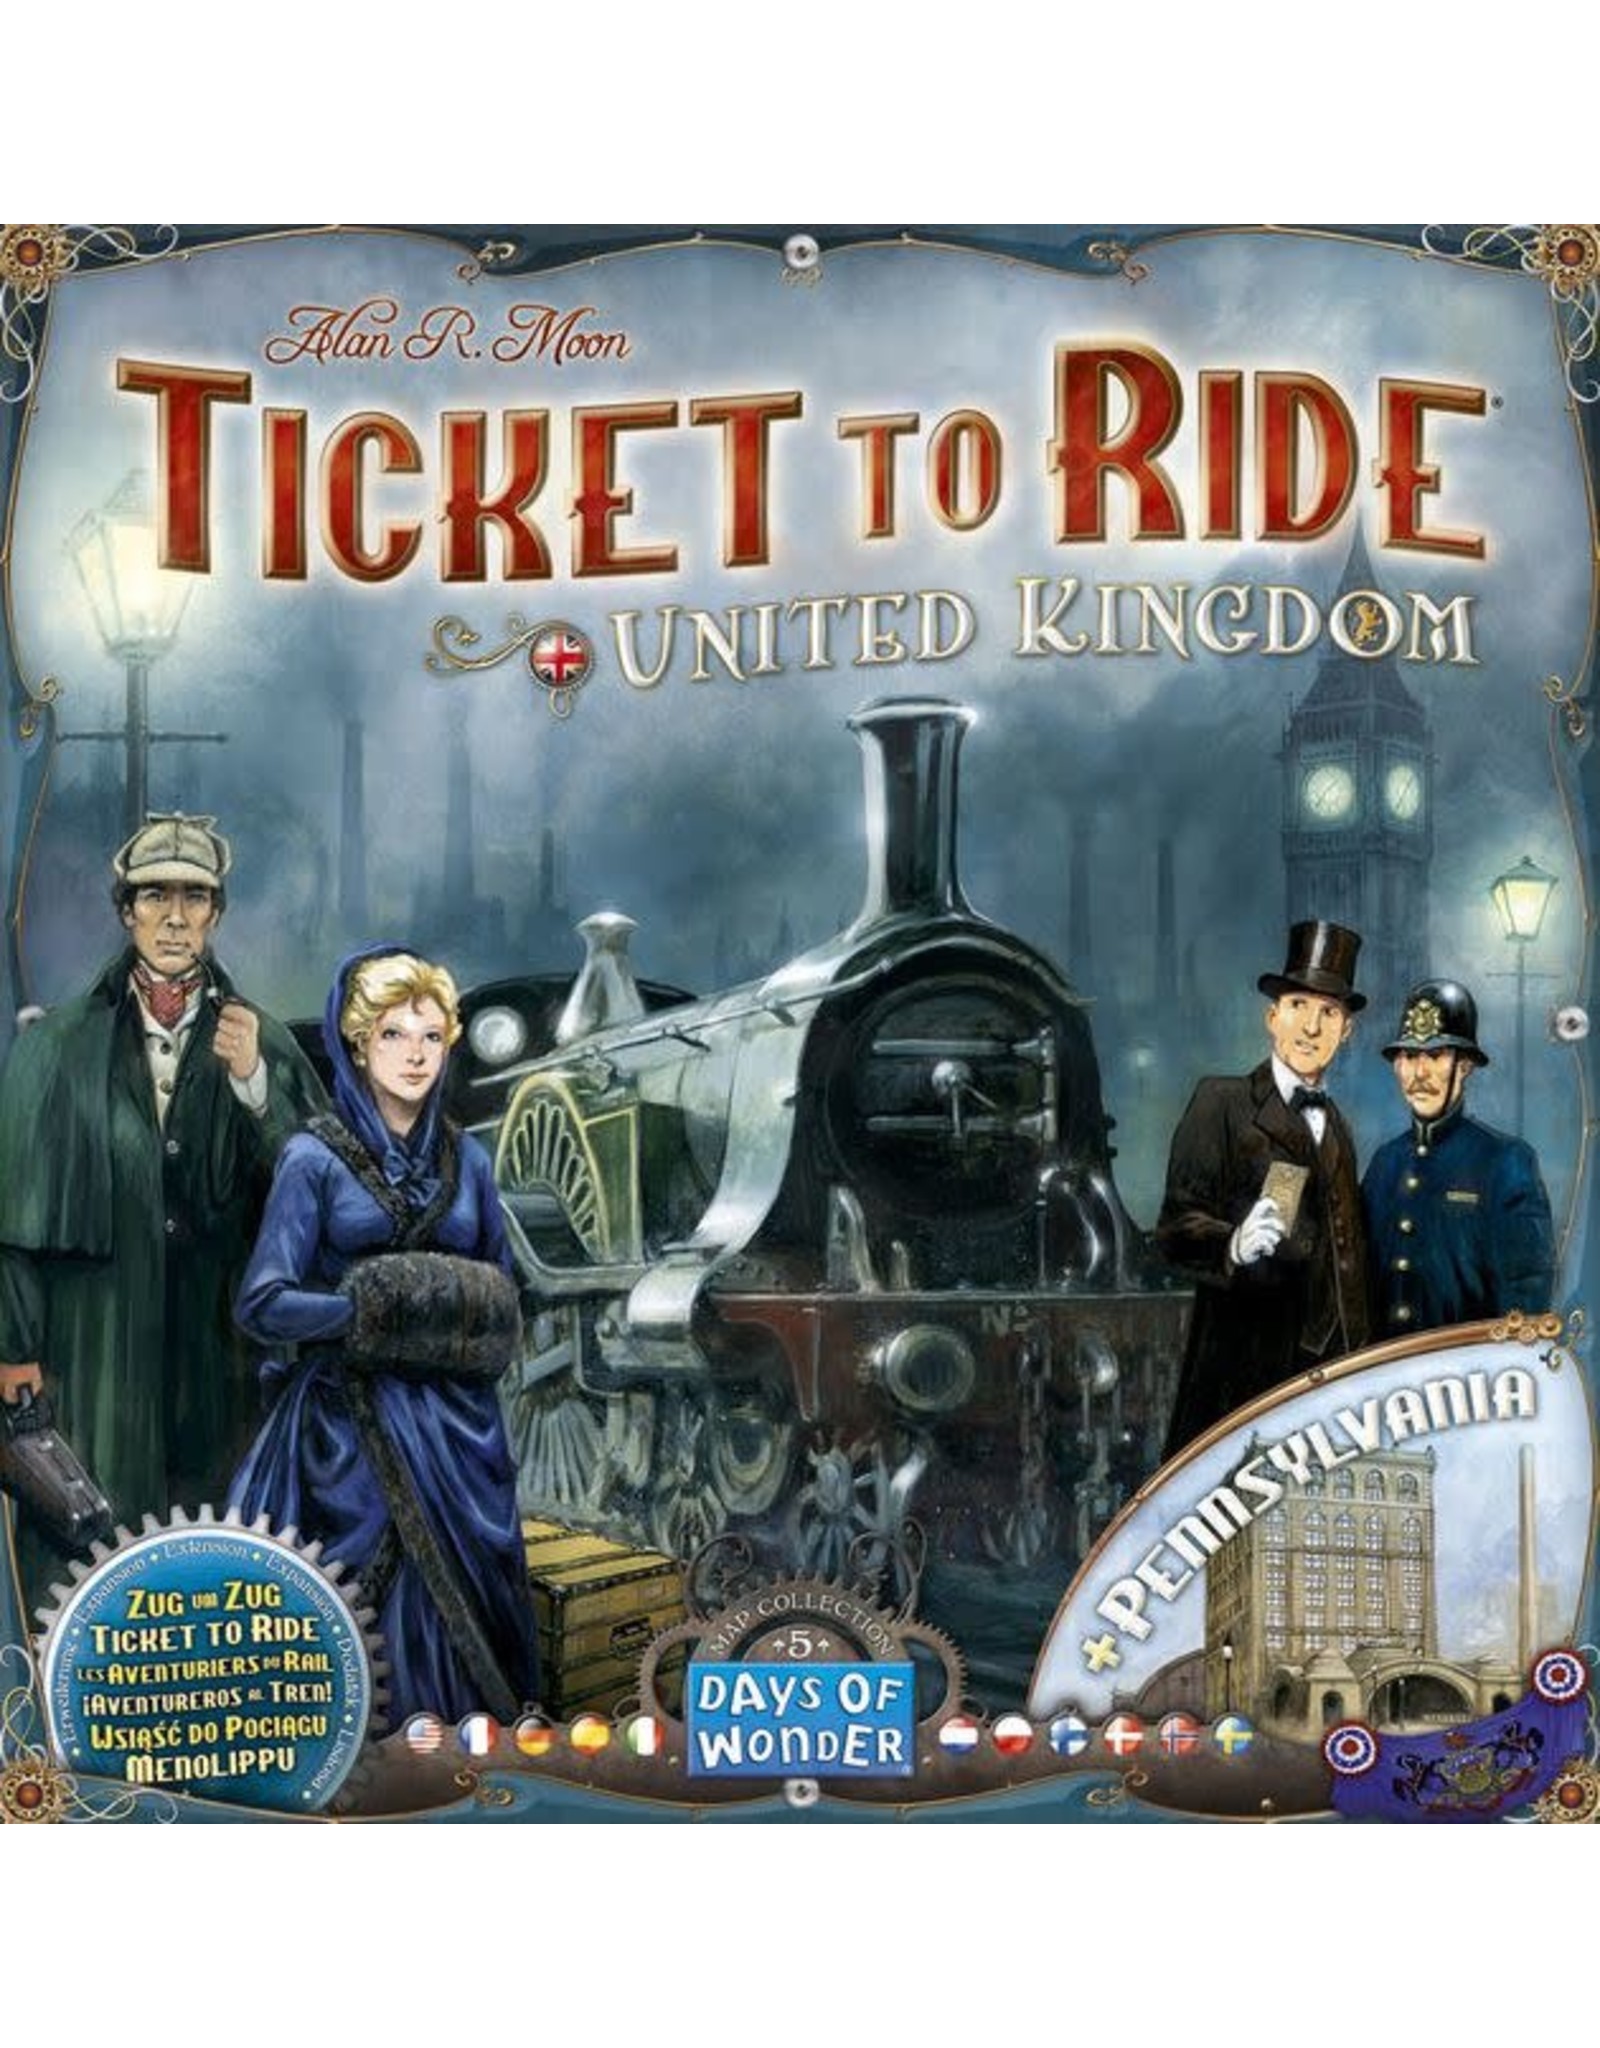 Ticket to Ride Expansion UK and Pennsylvania